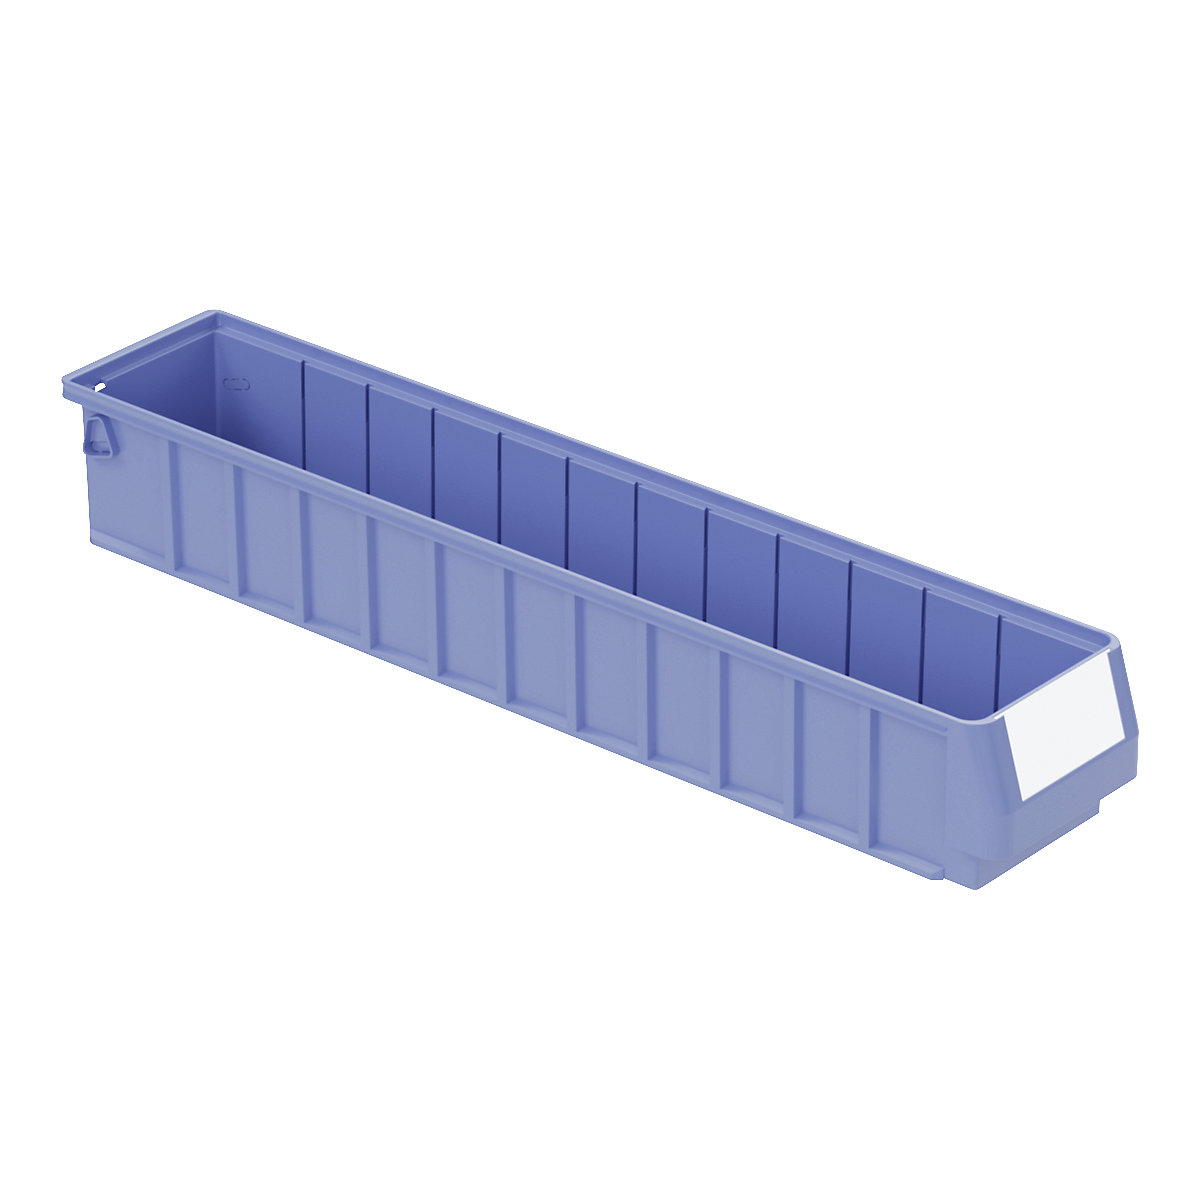 Shelf bin – BITO, made of PP, LxWxH 600 x 117 x 90 mm, pack of 16-16